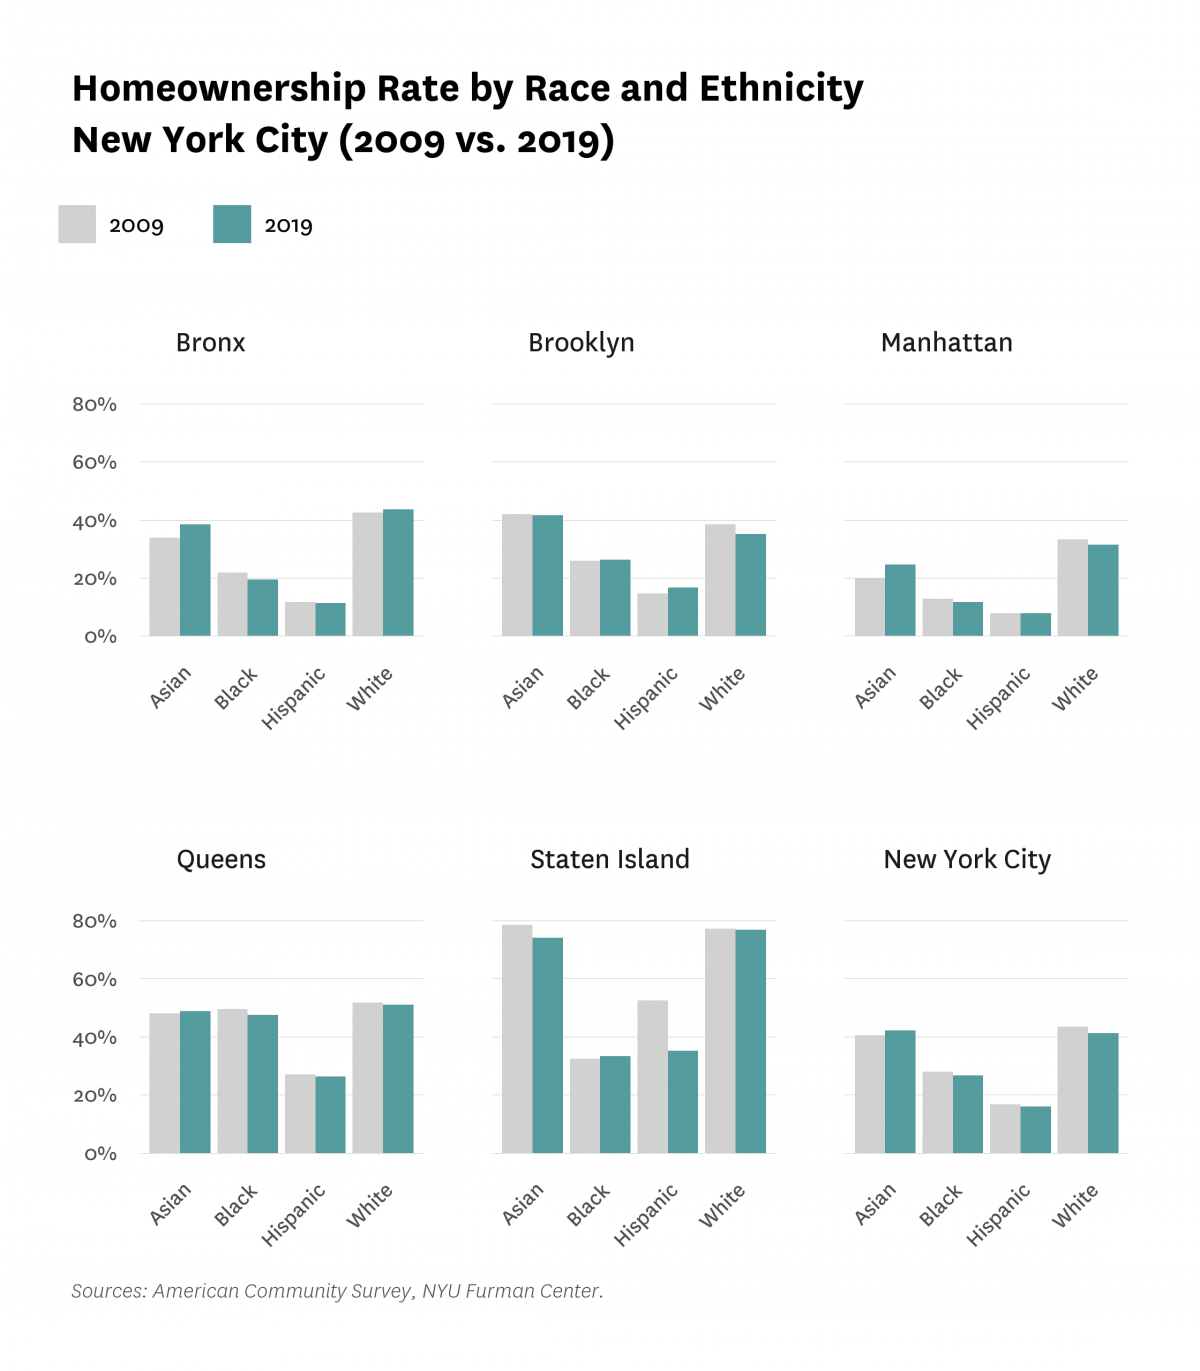 Bar graphs comparing the homeownership rate by race and ethnicity within each borough of New York City in 2009 versus 2019.